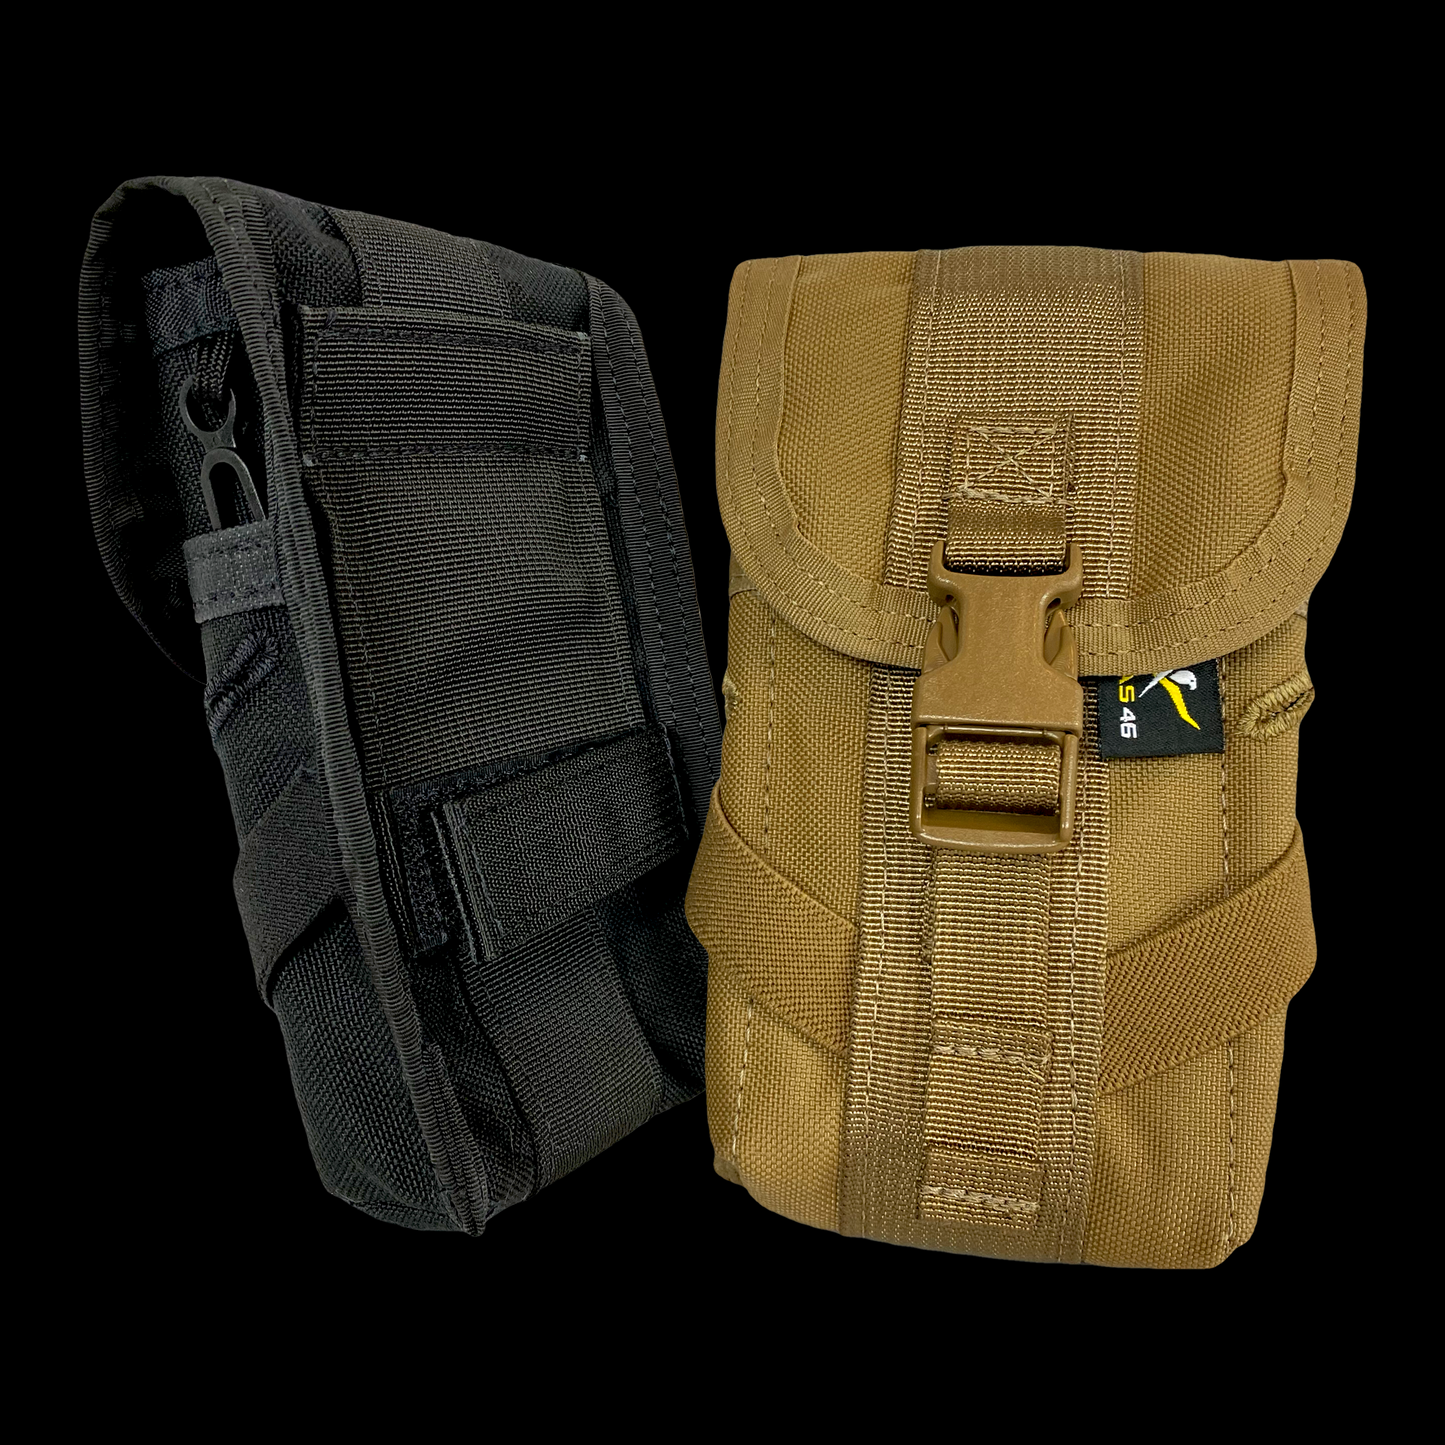 AIMS™ Flapped Mobile Phone Pouch v2